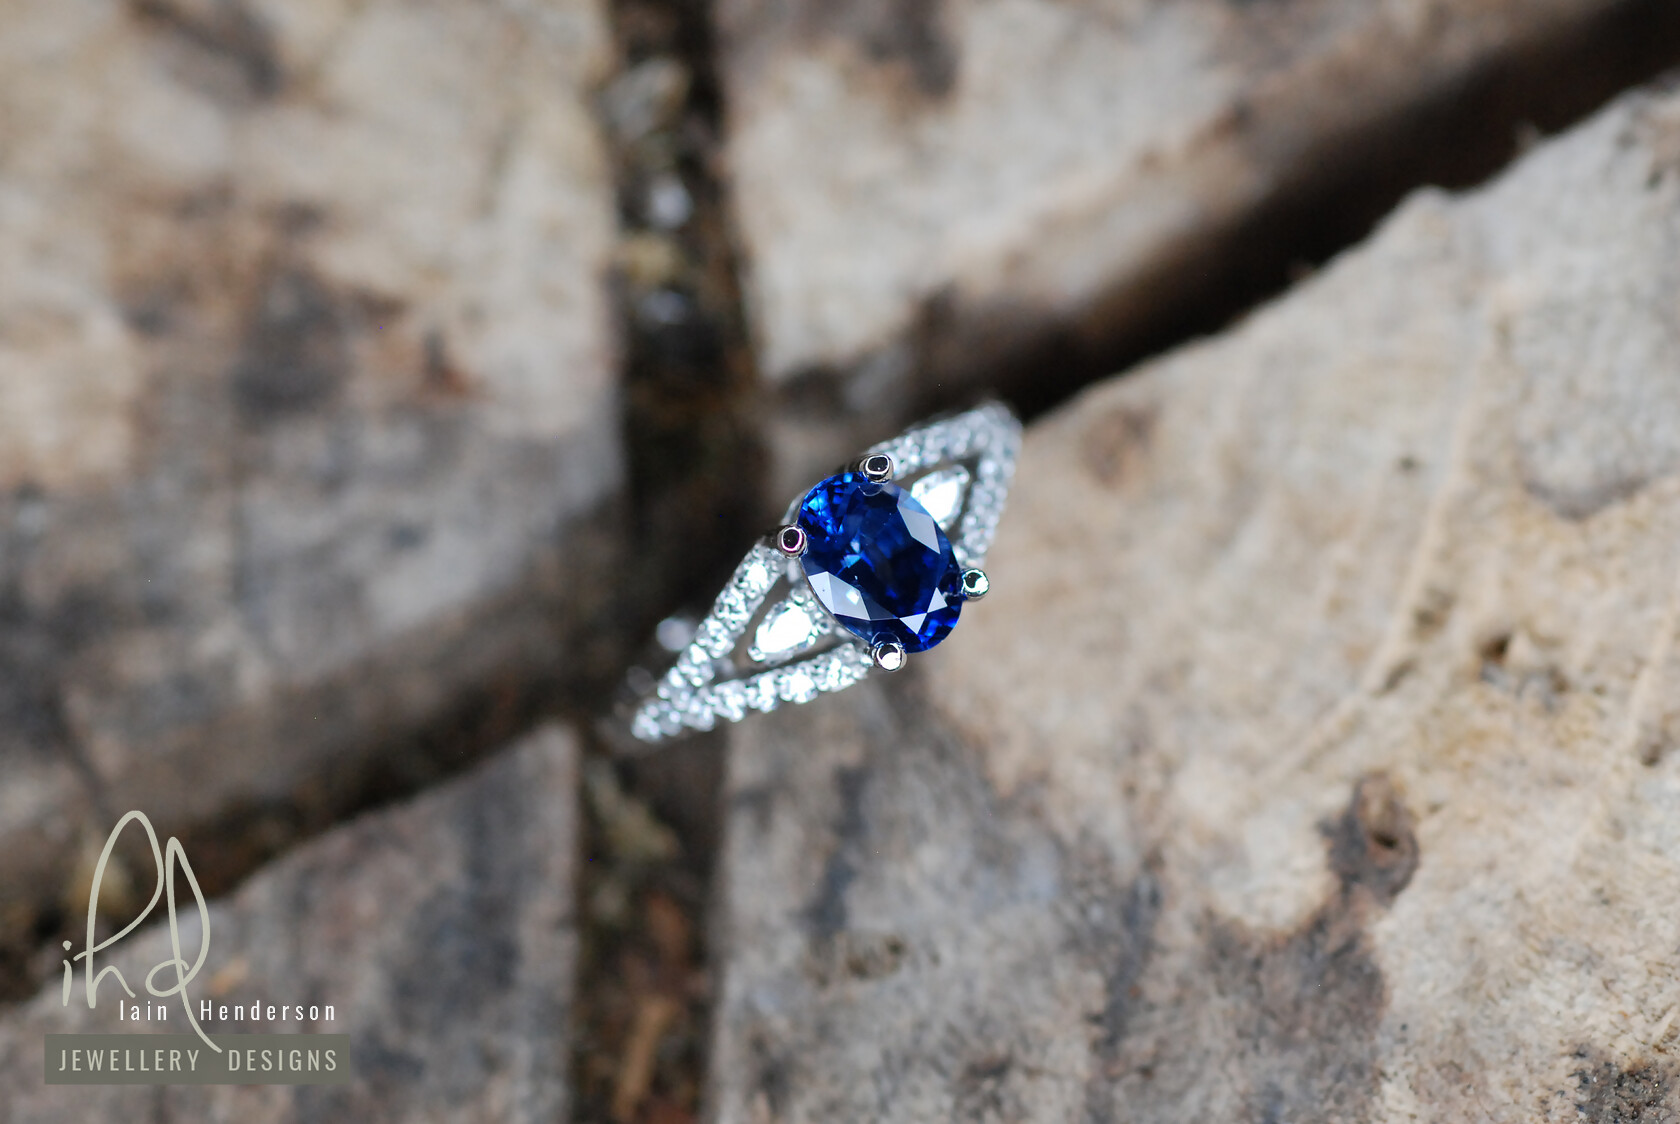 Bespoke platinum engagement ring with an oval sapphire centre stone, small pear shaped diamonds between the split shank and small diamonds on the shoulders